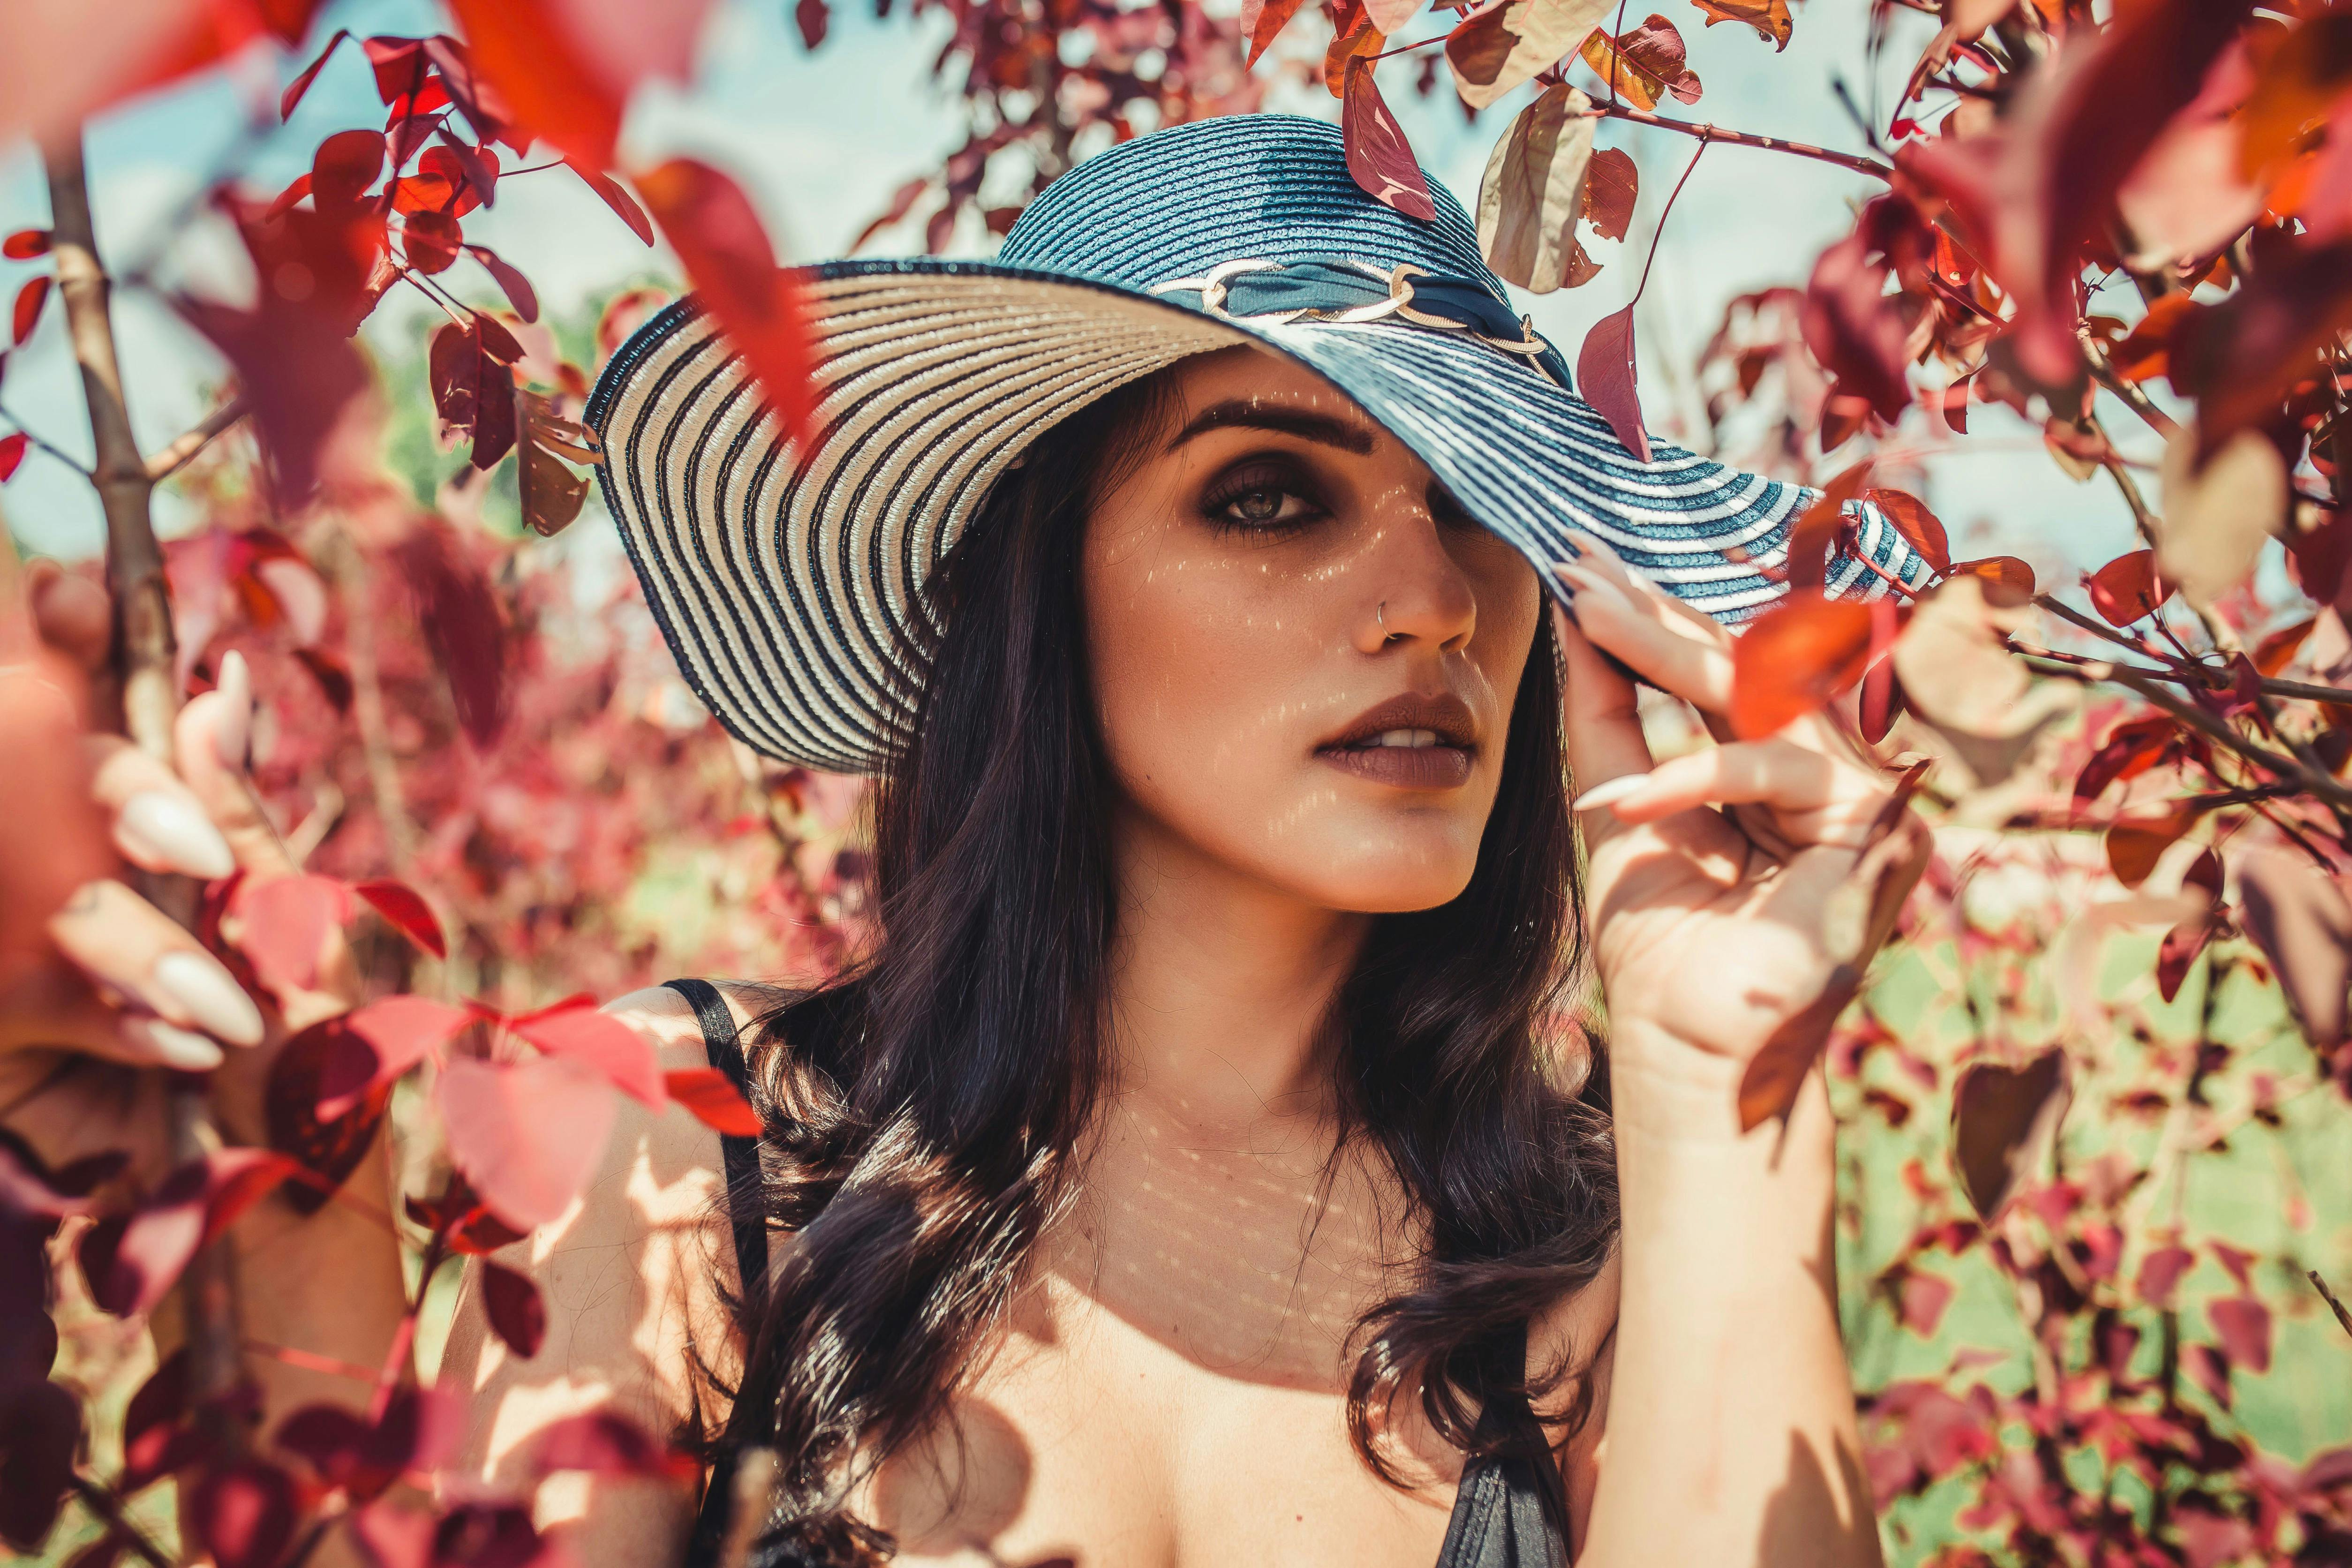 Woman Wearing Sun Hat While Being Surrounded by Red Leaves Outdoors